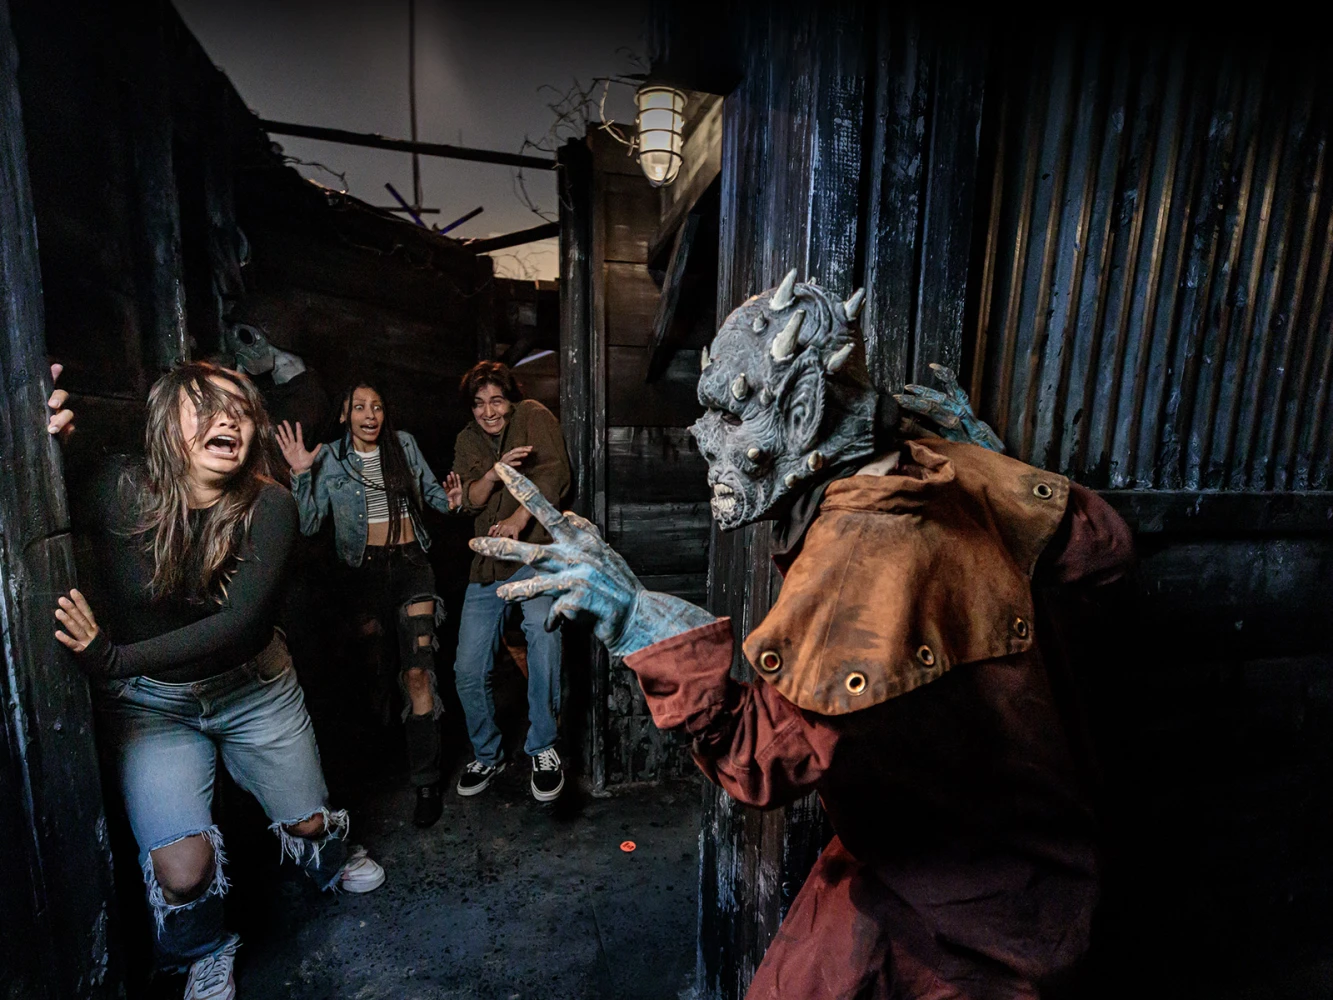 Knott's Scary Farm: What to expect - 1